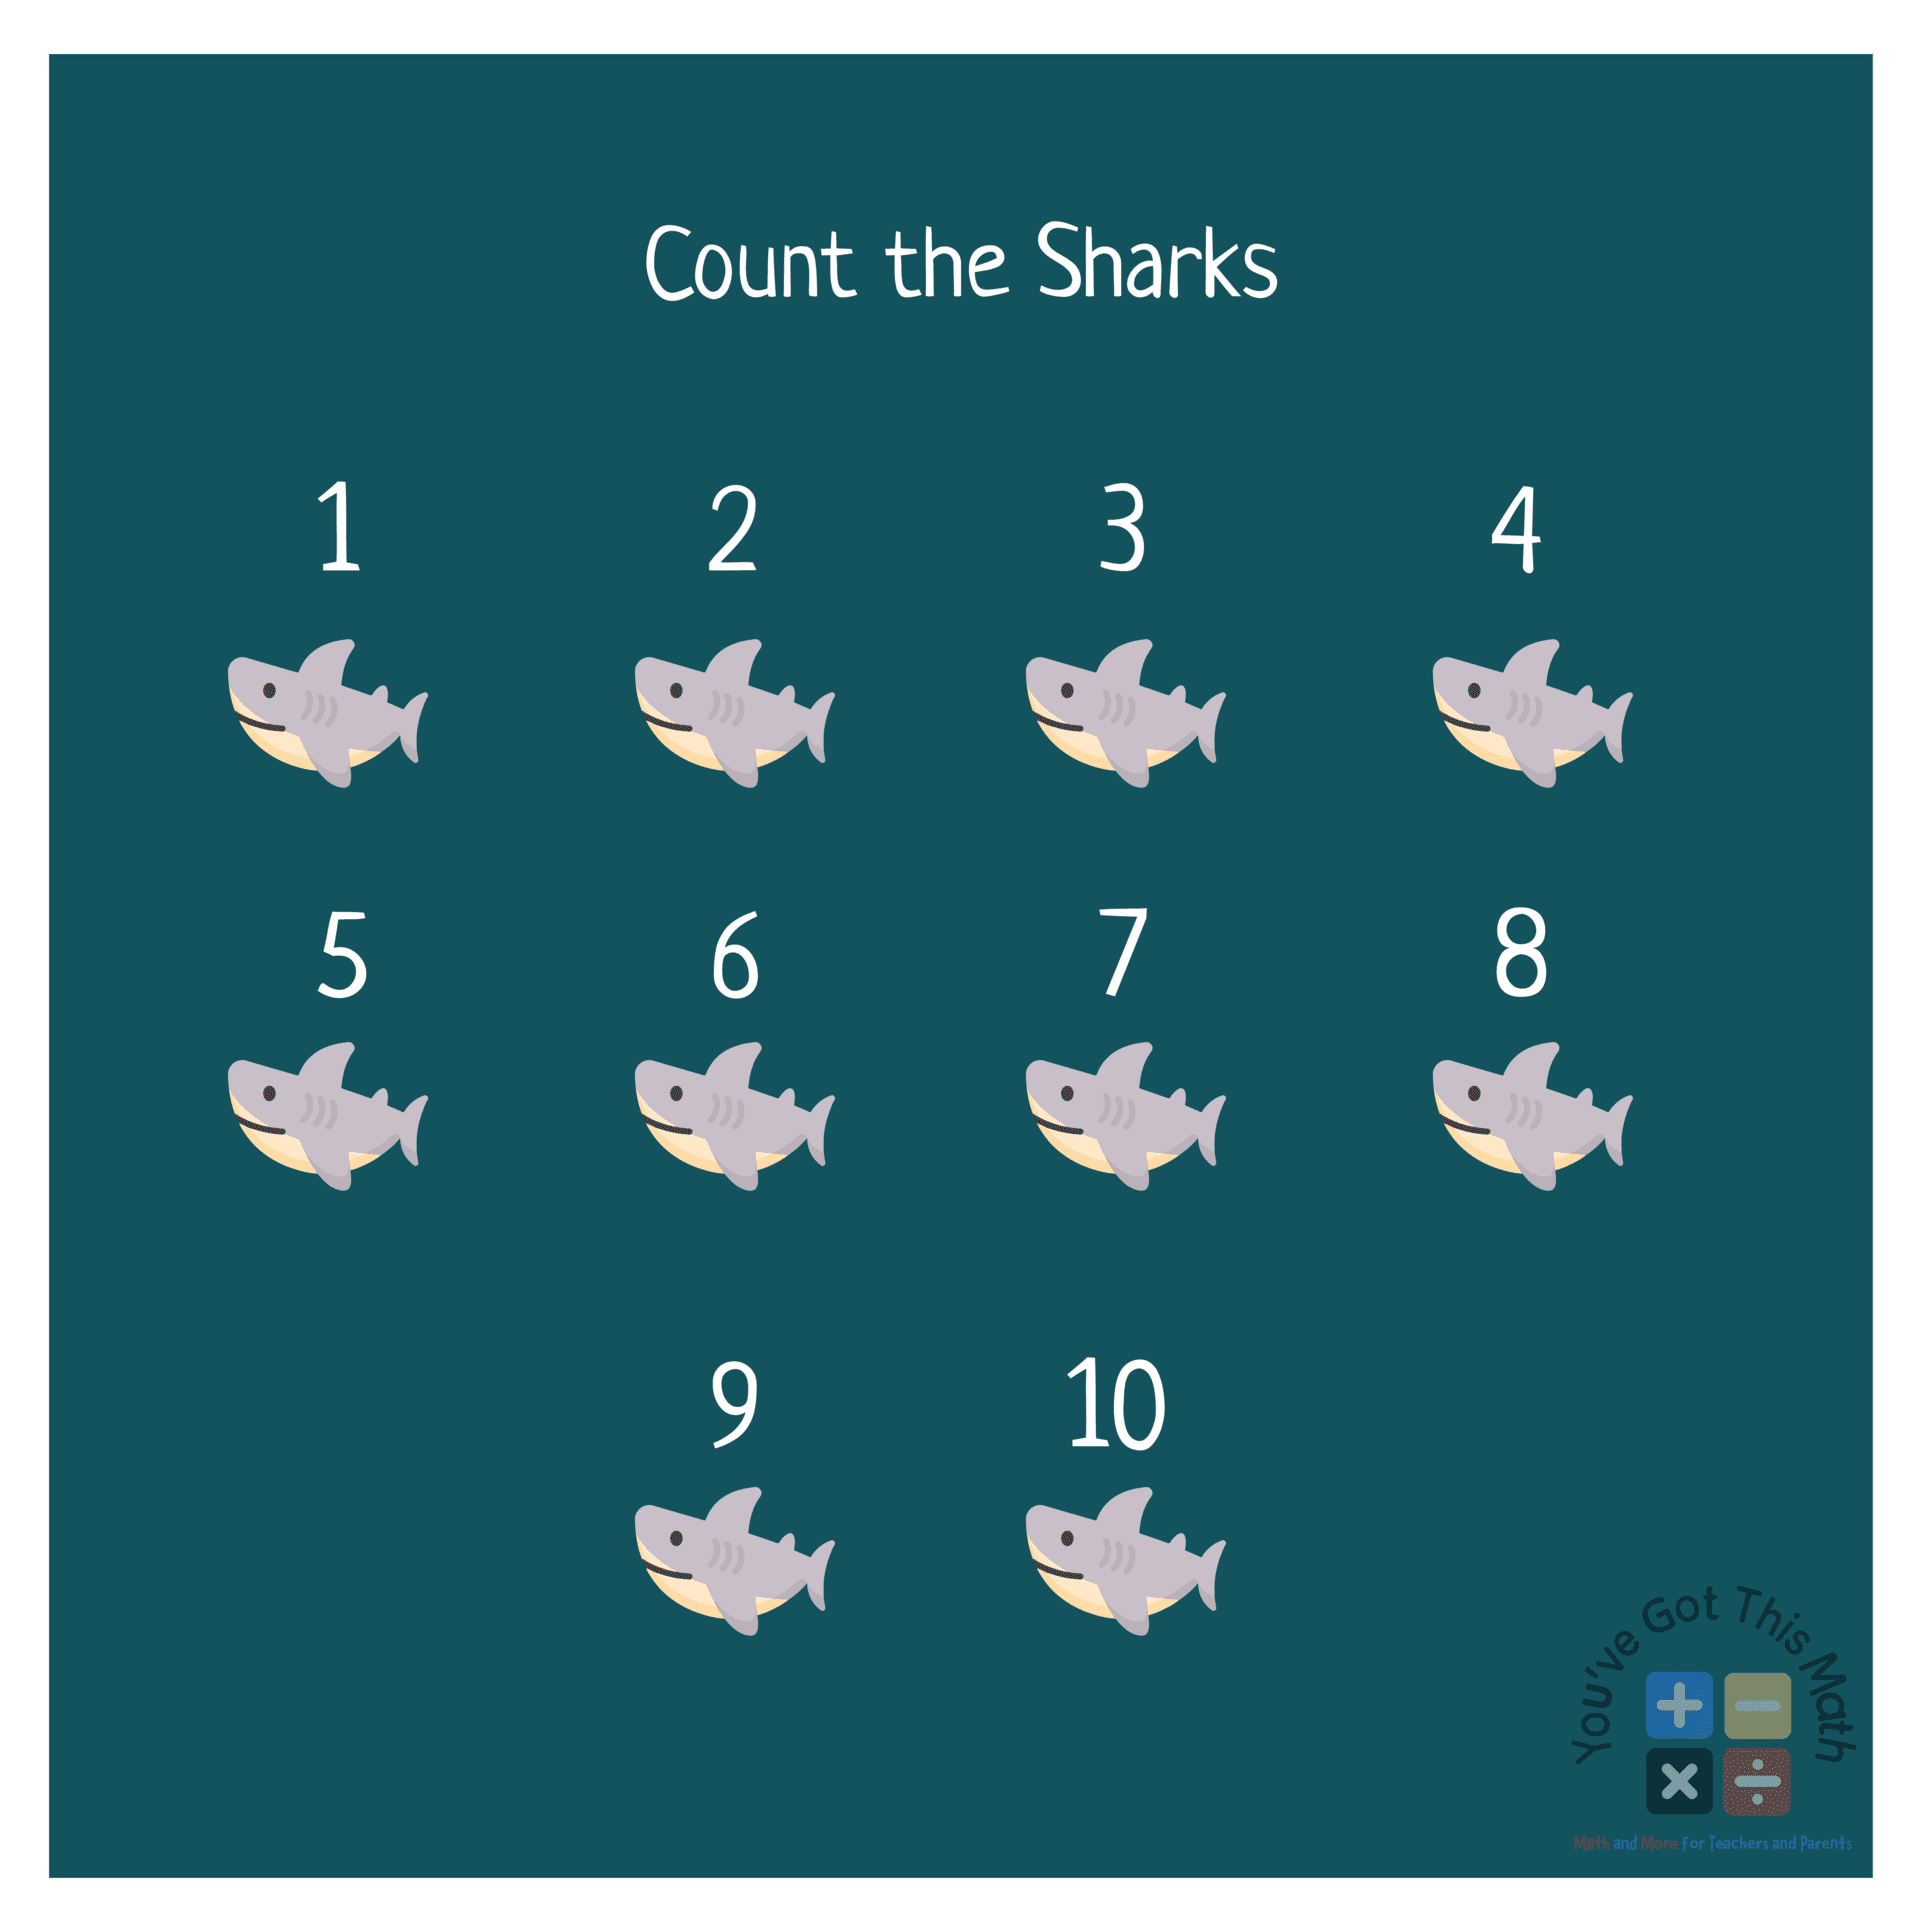 Count the sharks by number